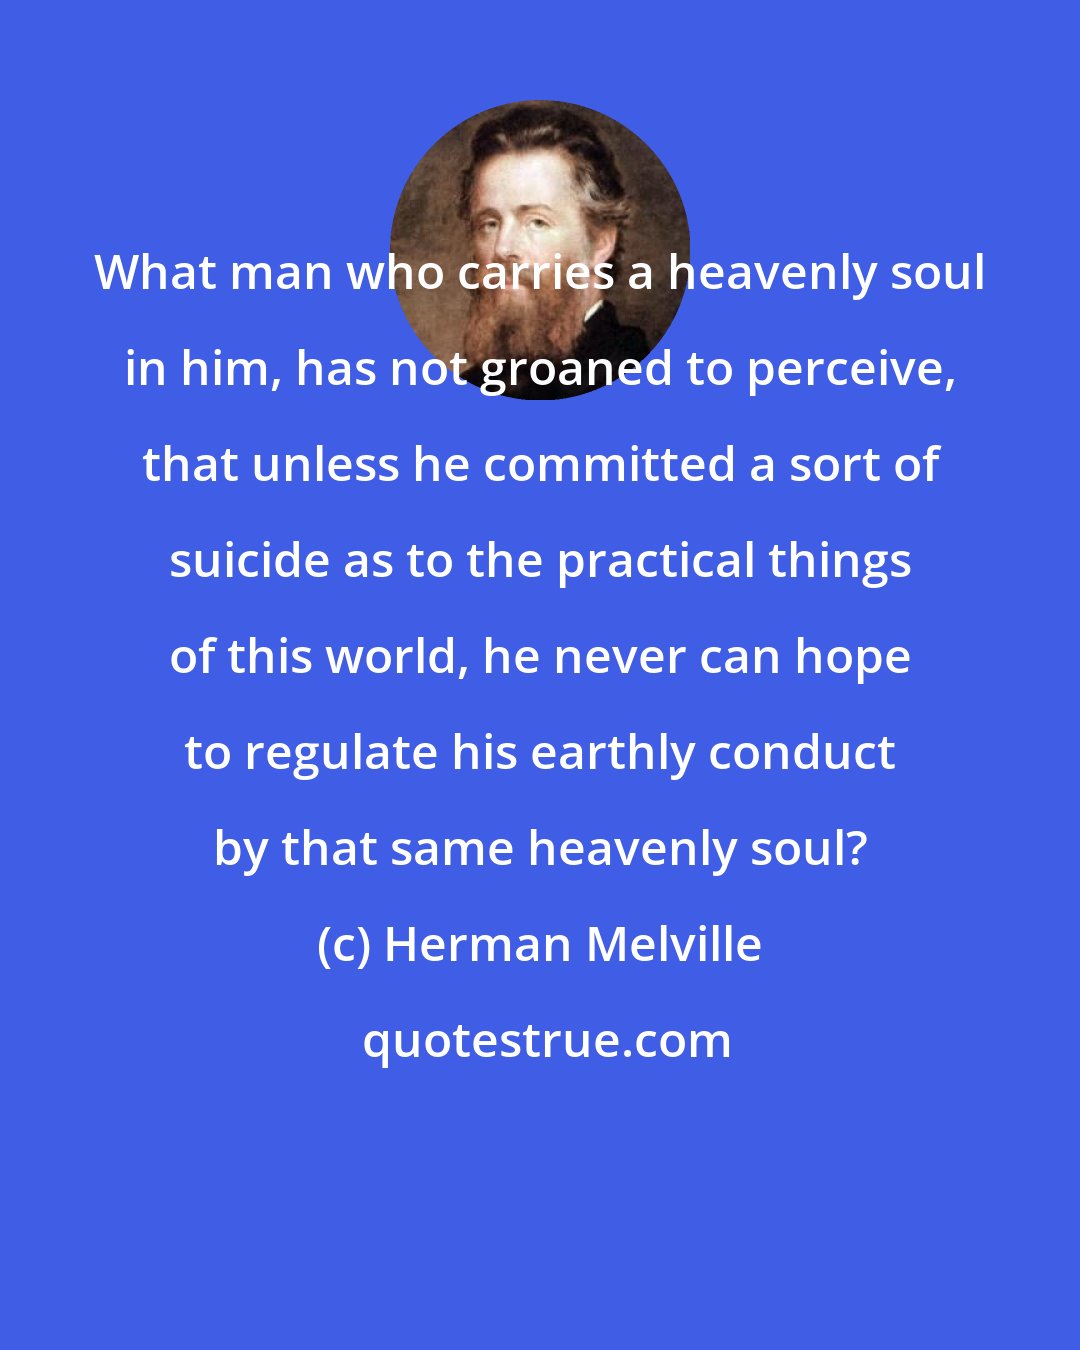 Herman Melville: What man who carries a heavenly soul in him, has not groaned to perceive, that unless he committed a sort of suicide as to the practical things of this world, he never can hope to regulate his earthly conduct by that same heavenly soul?